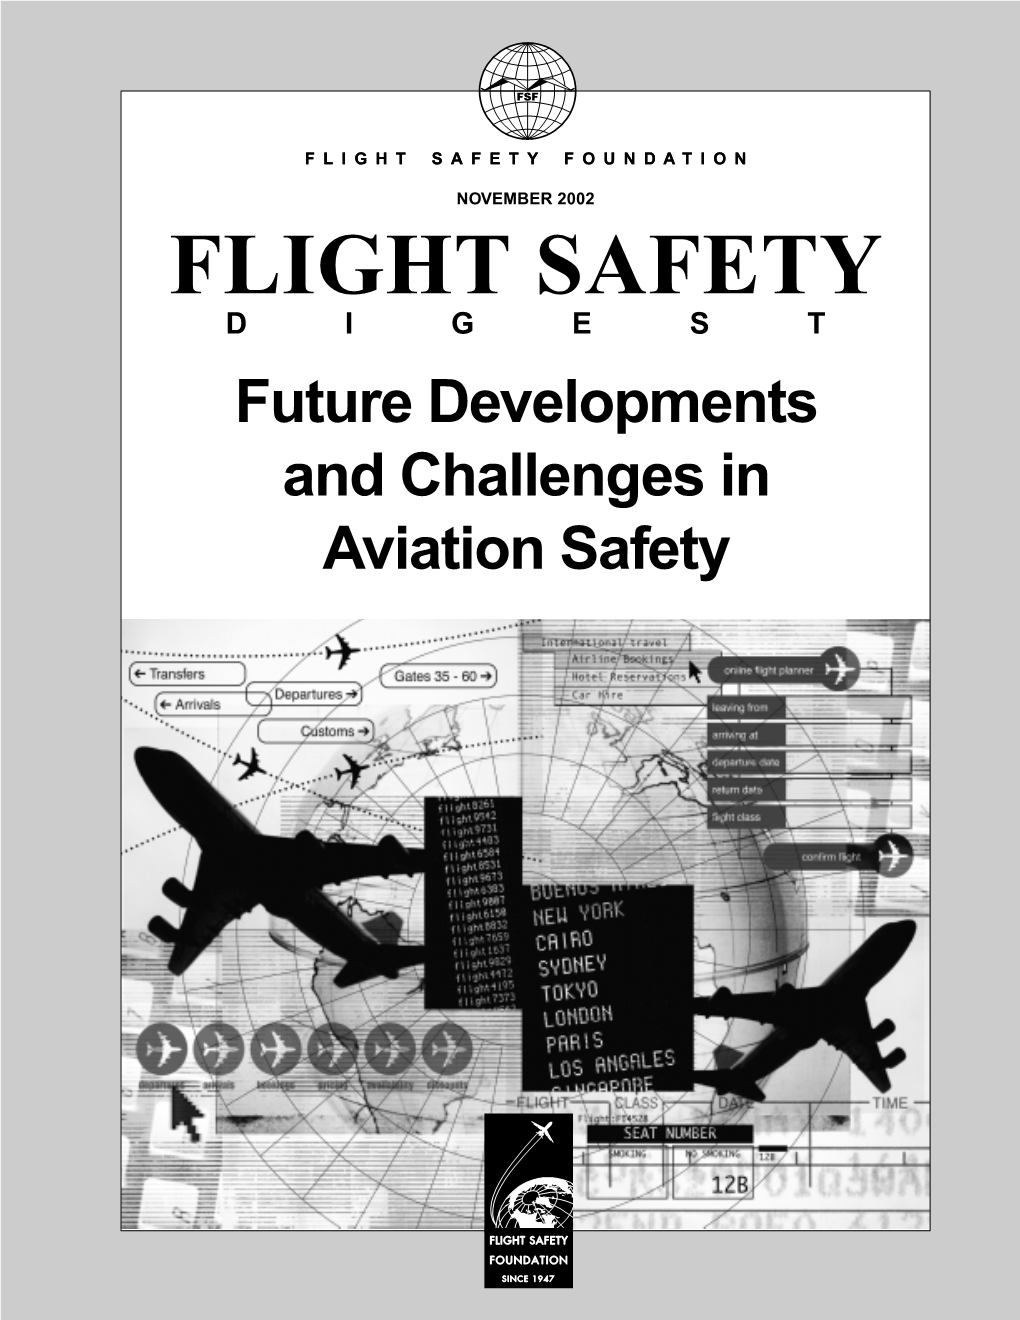 Future Developments and Challenges in Aviation Safety